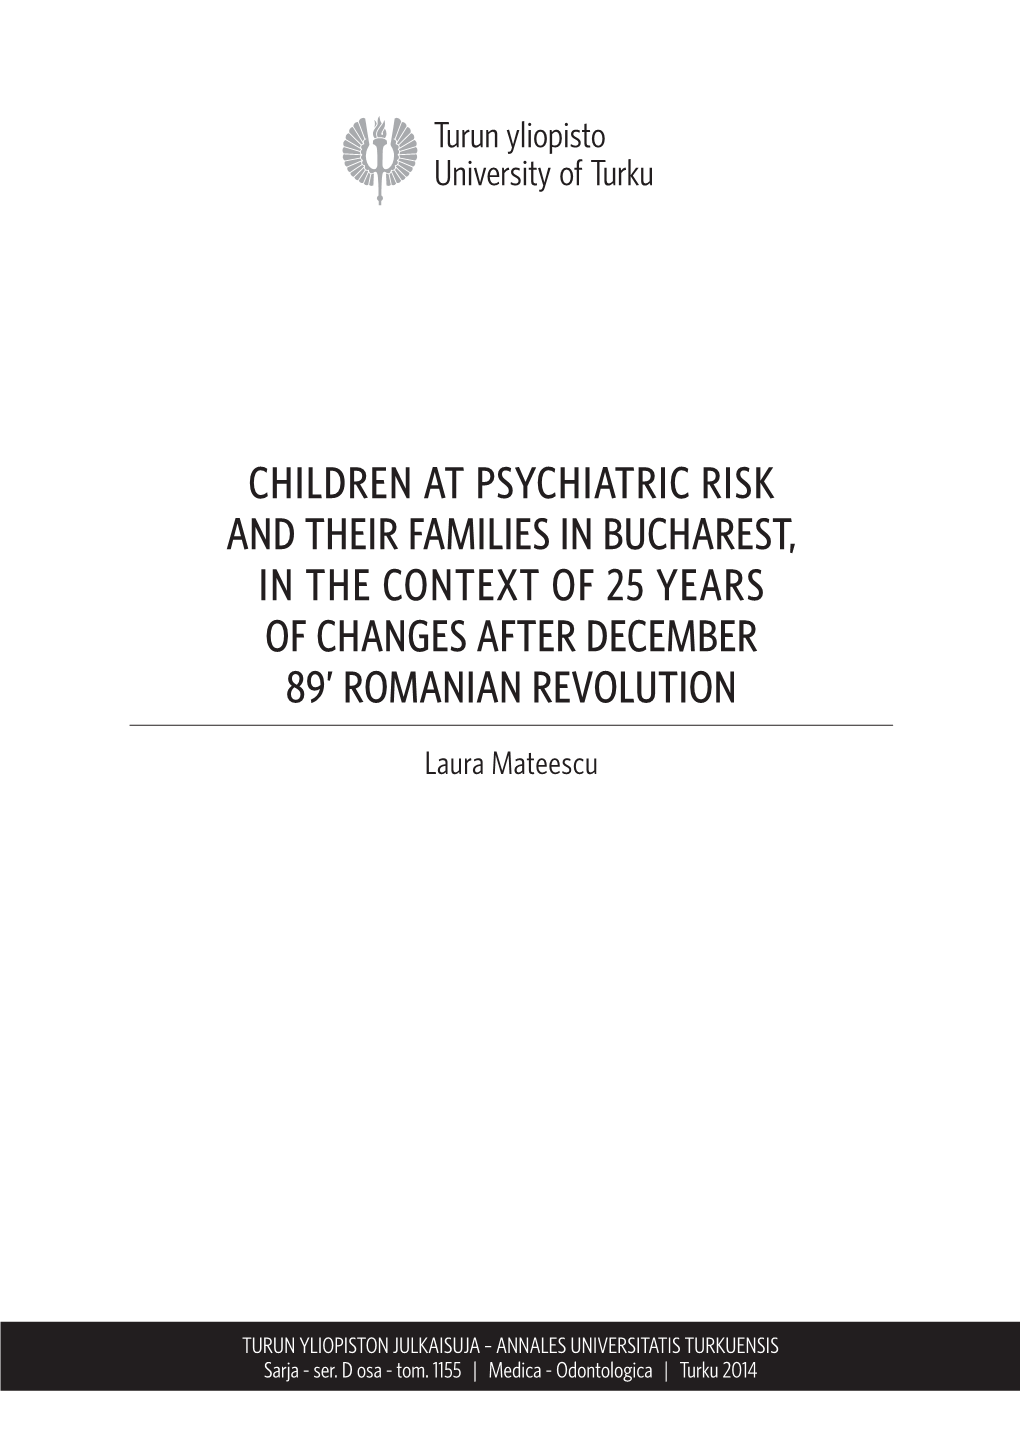 Children at Psychiatric Risk and Their Families in Bucharest, in the Context of 25 Years of Changes After December 89' Romania